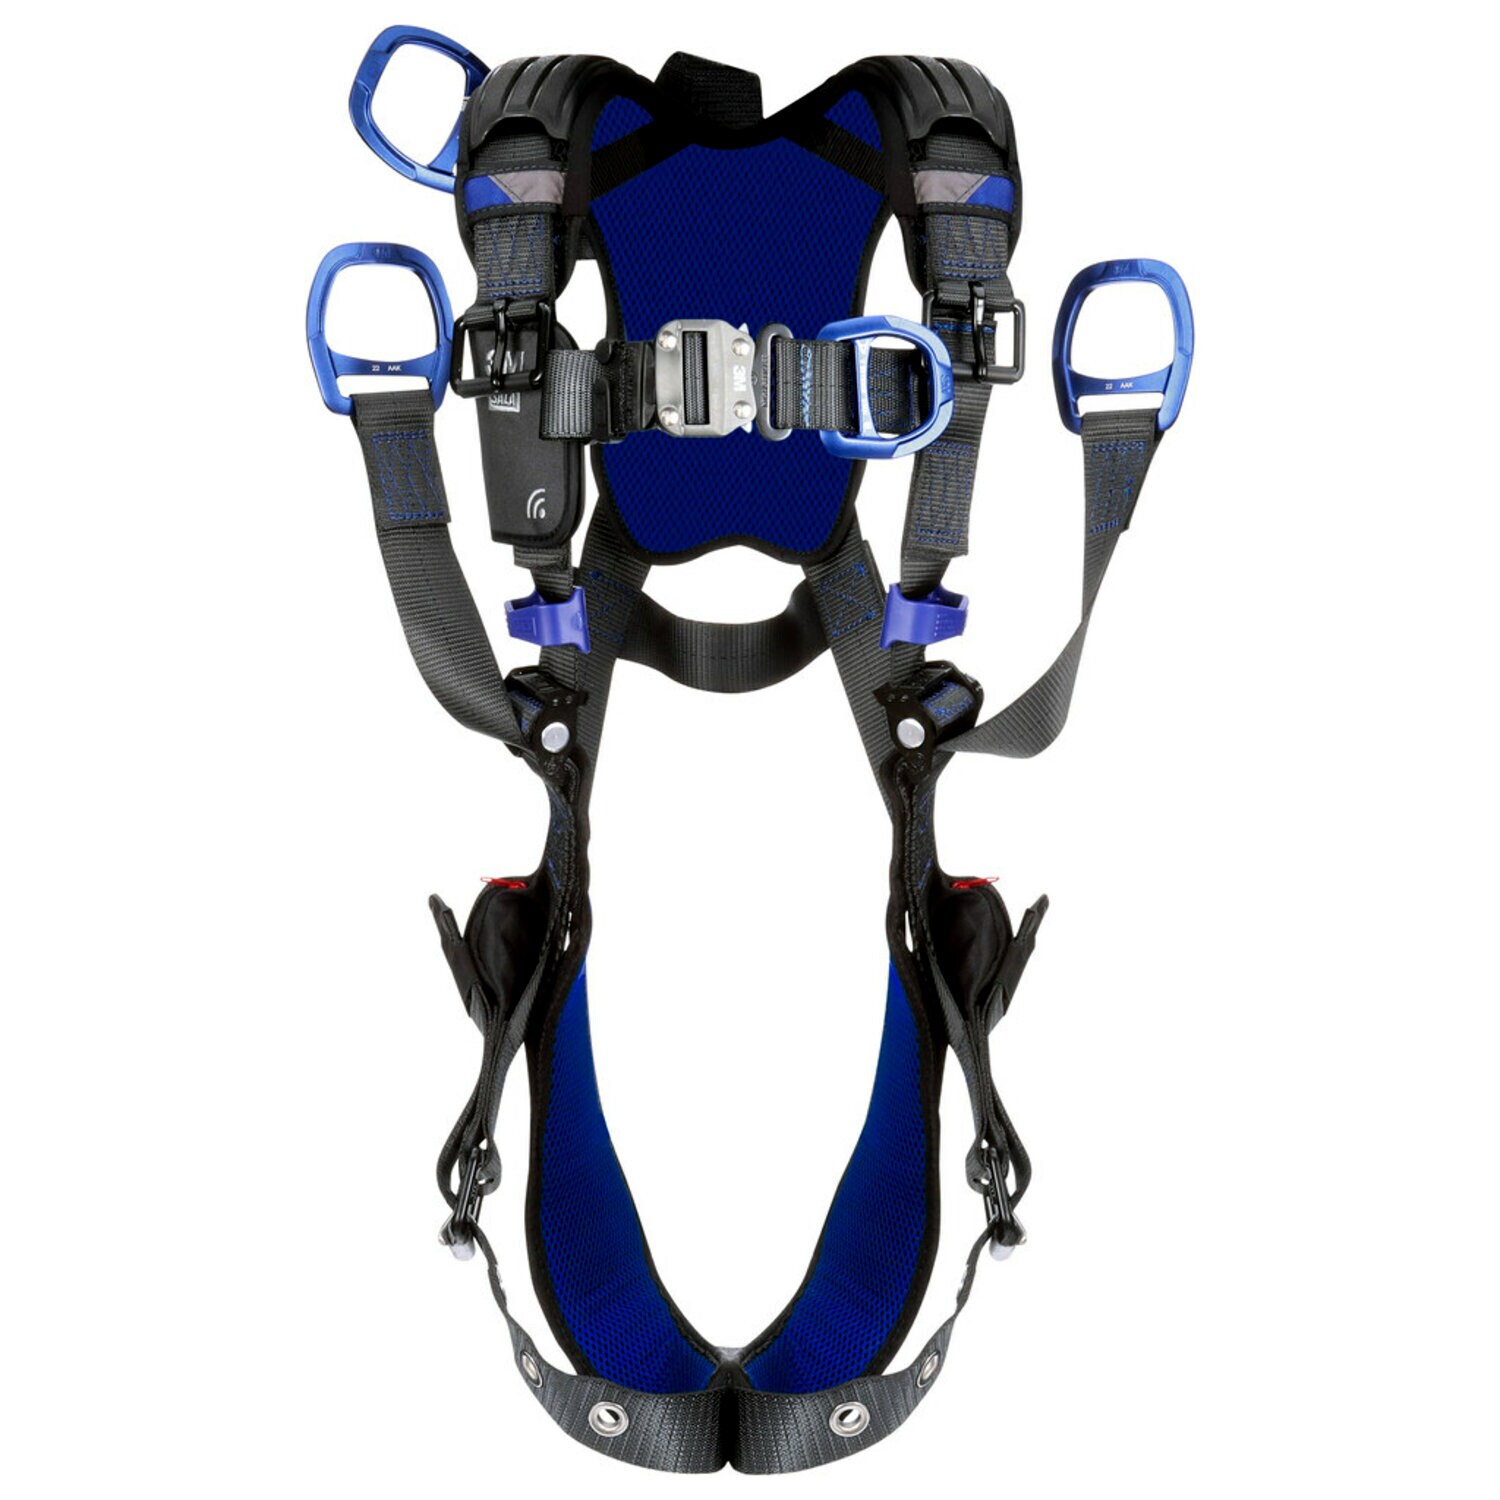 7012818051 - 3M DBI-SALA ExoFit X300 Comfort Oil and Gas Climbing/Lifting Safety Harness with Tongue Buckle Belt Connector 1403224, Medium